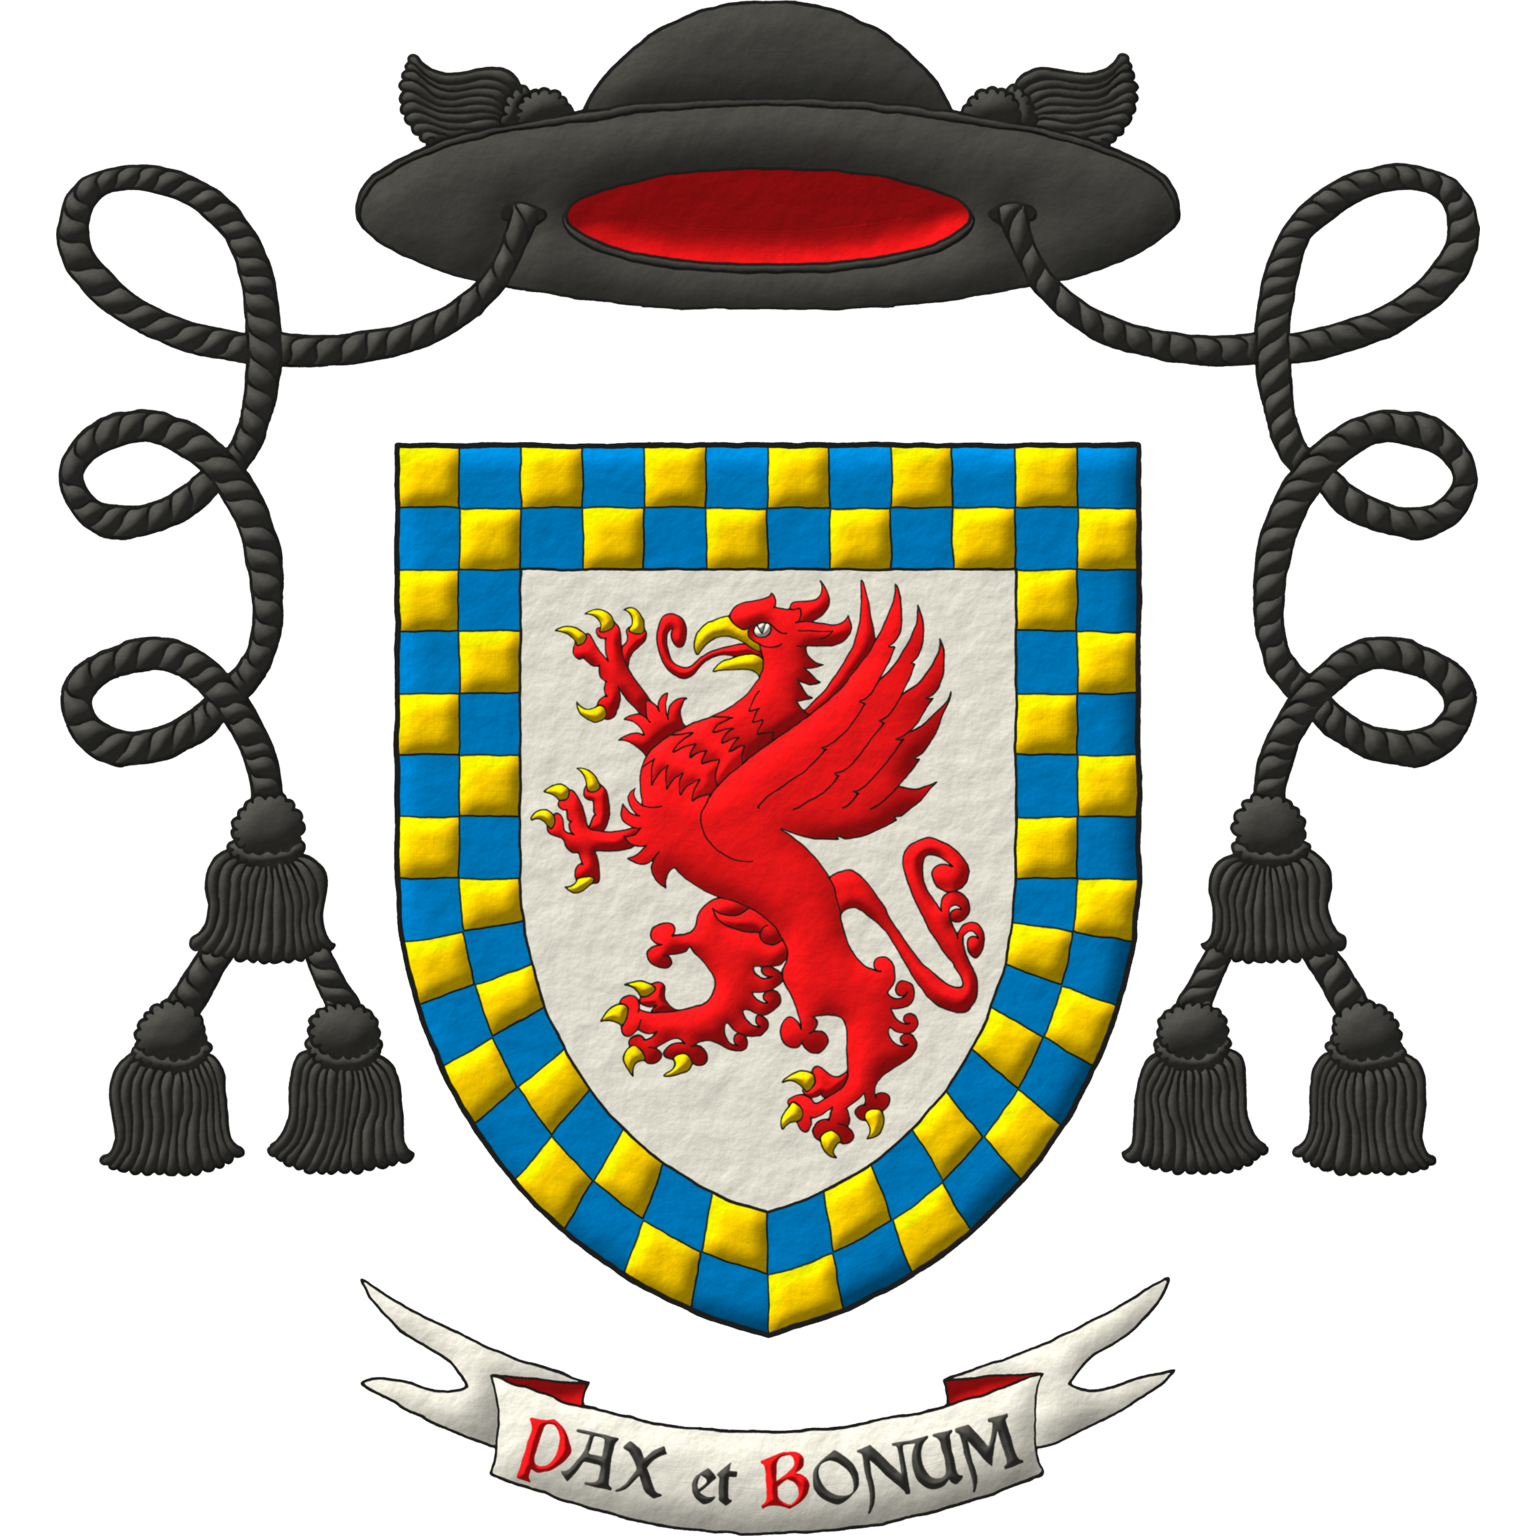 Argent, a griffin segreant Gules, armed and beaked Or; a bordure compony counter-compony Or and Azure. Crest: A galero with the rank of Episcopal Vicar with two cords, one on each side, each with three tassels, 1 and 2, Sable. Motto: «Pax et Bonum».